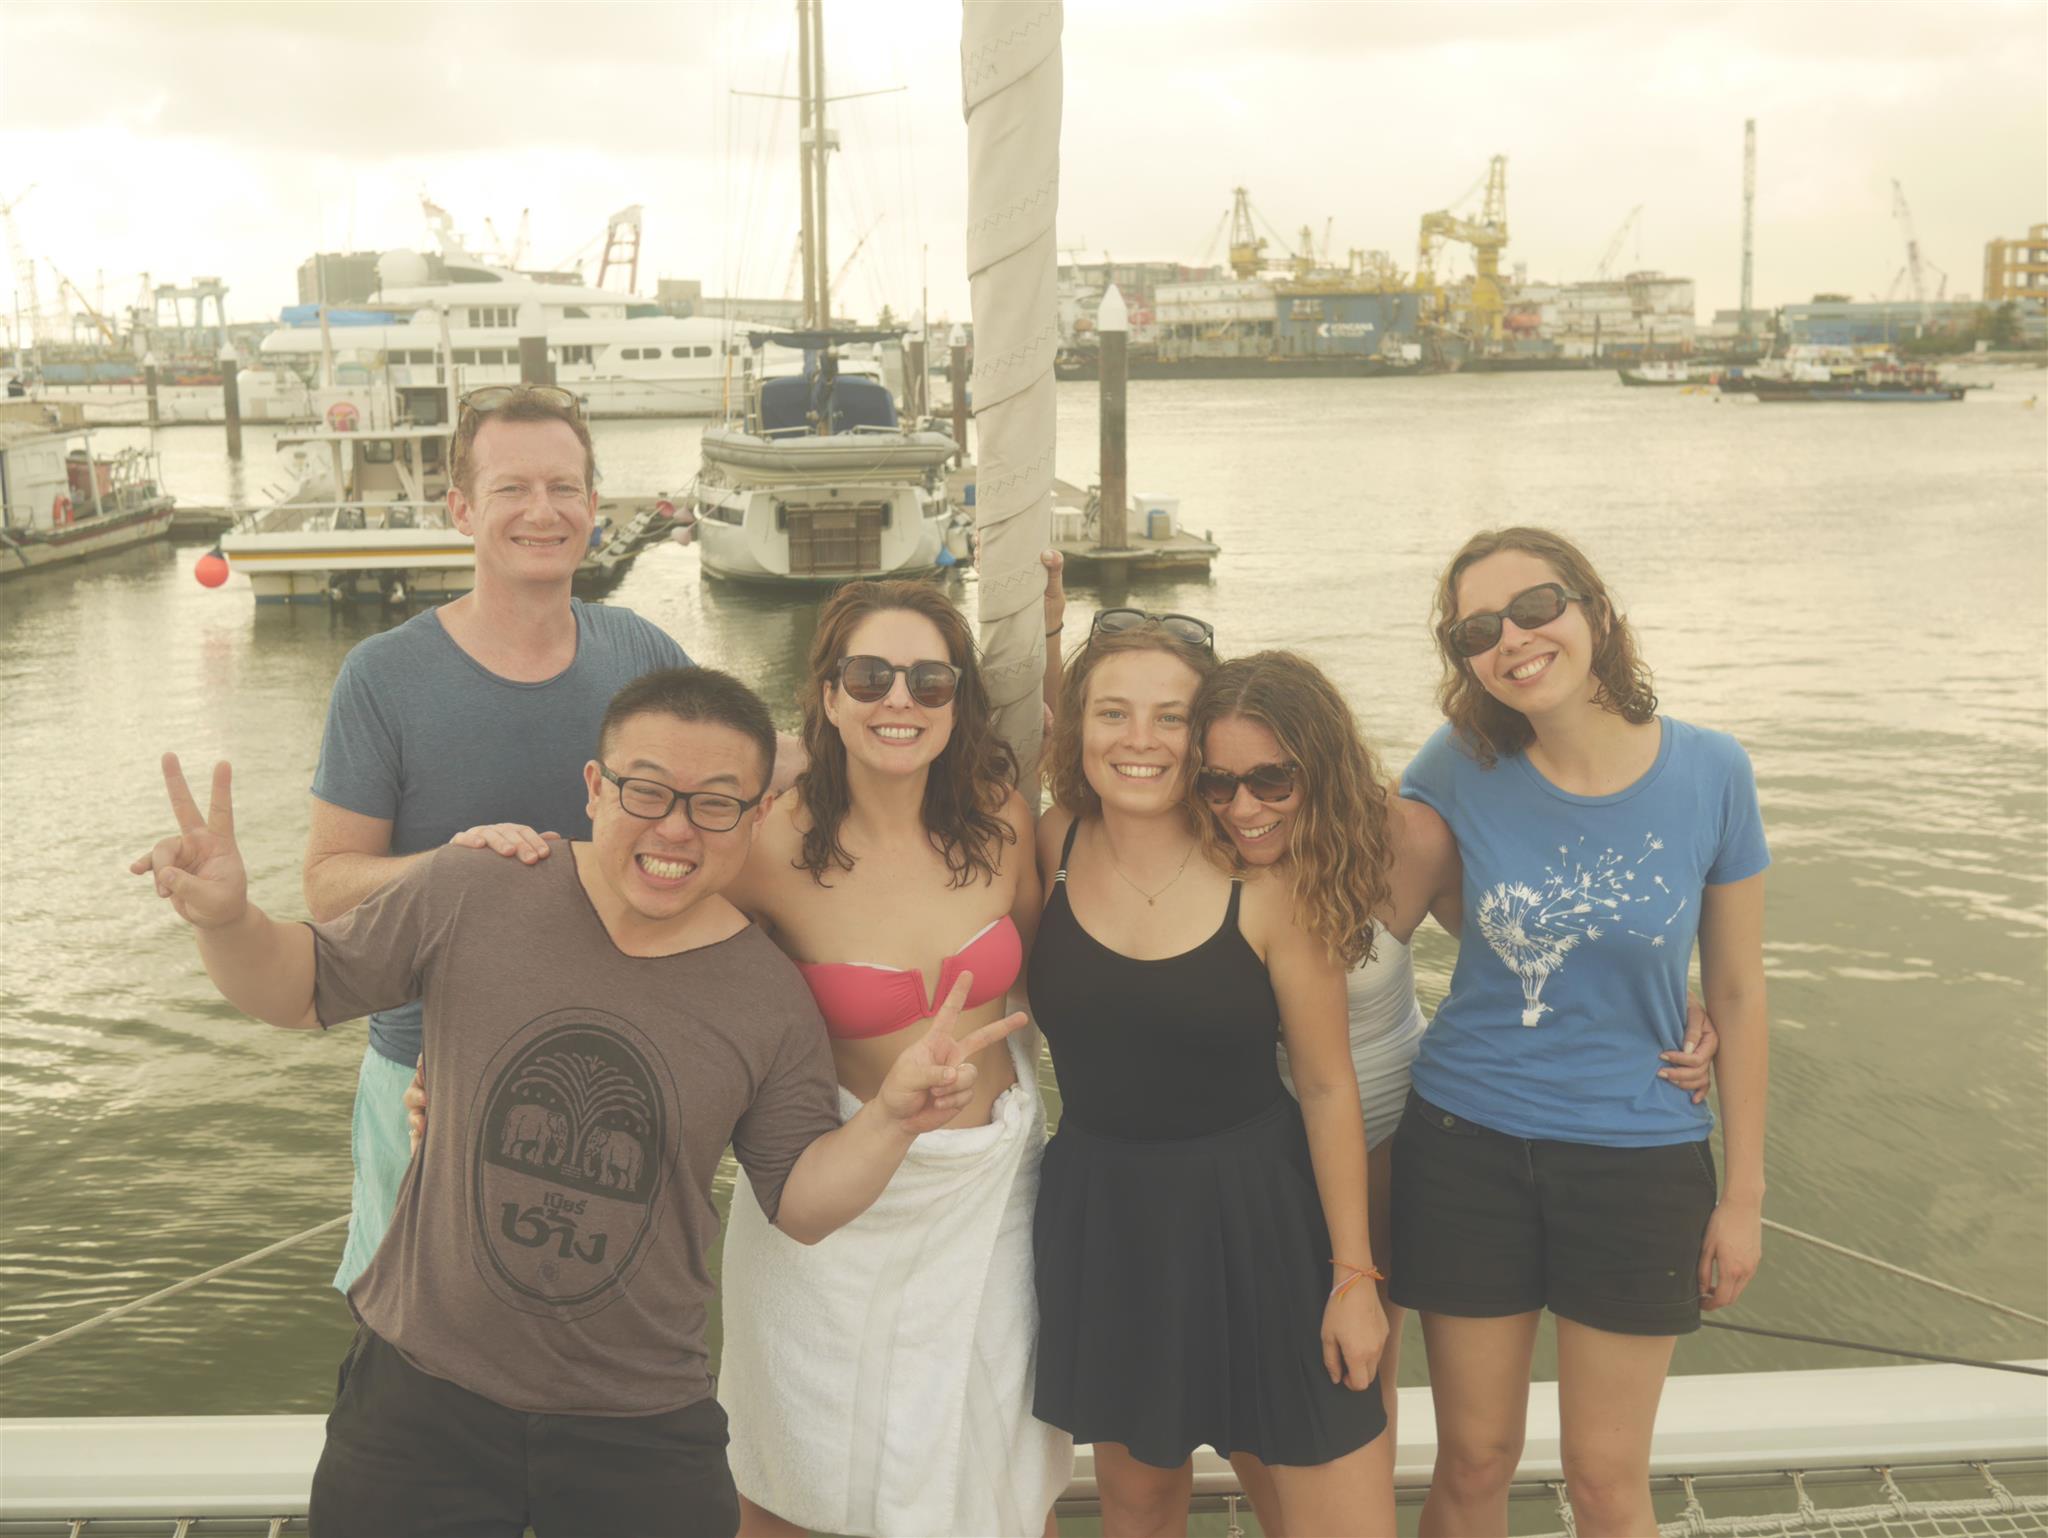 First impressions of Singapore from founder Gemma Manning